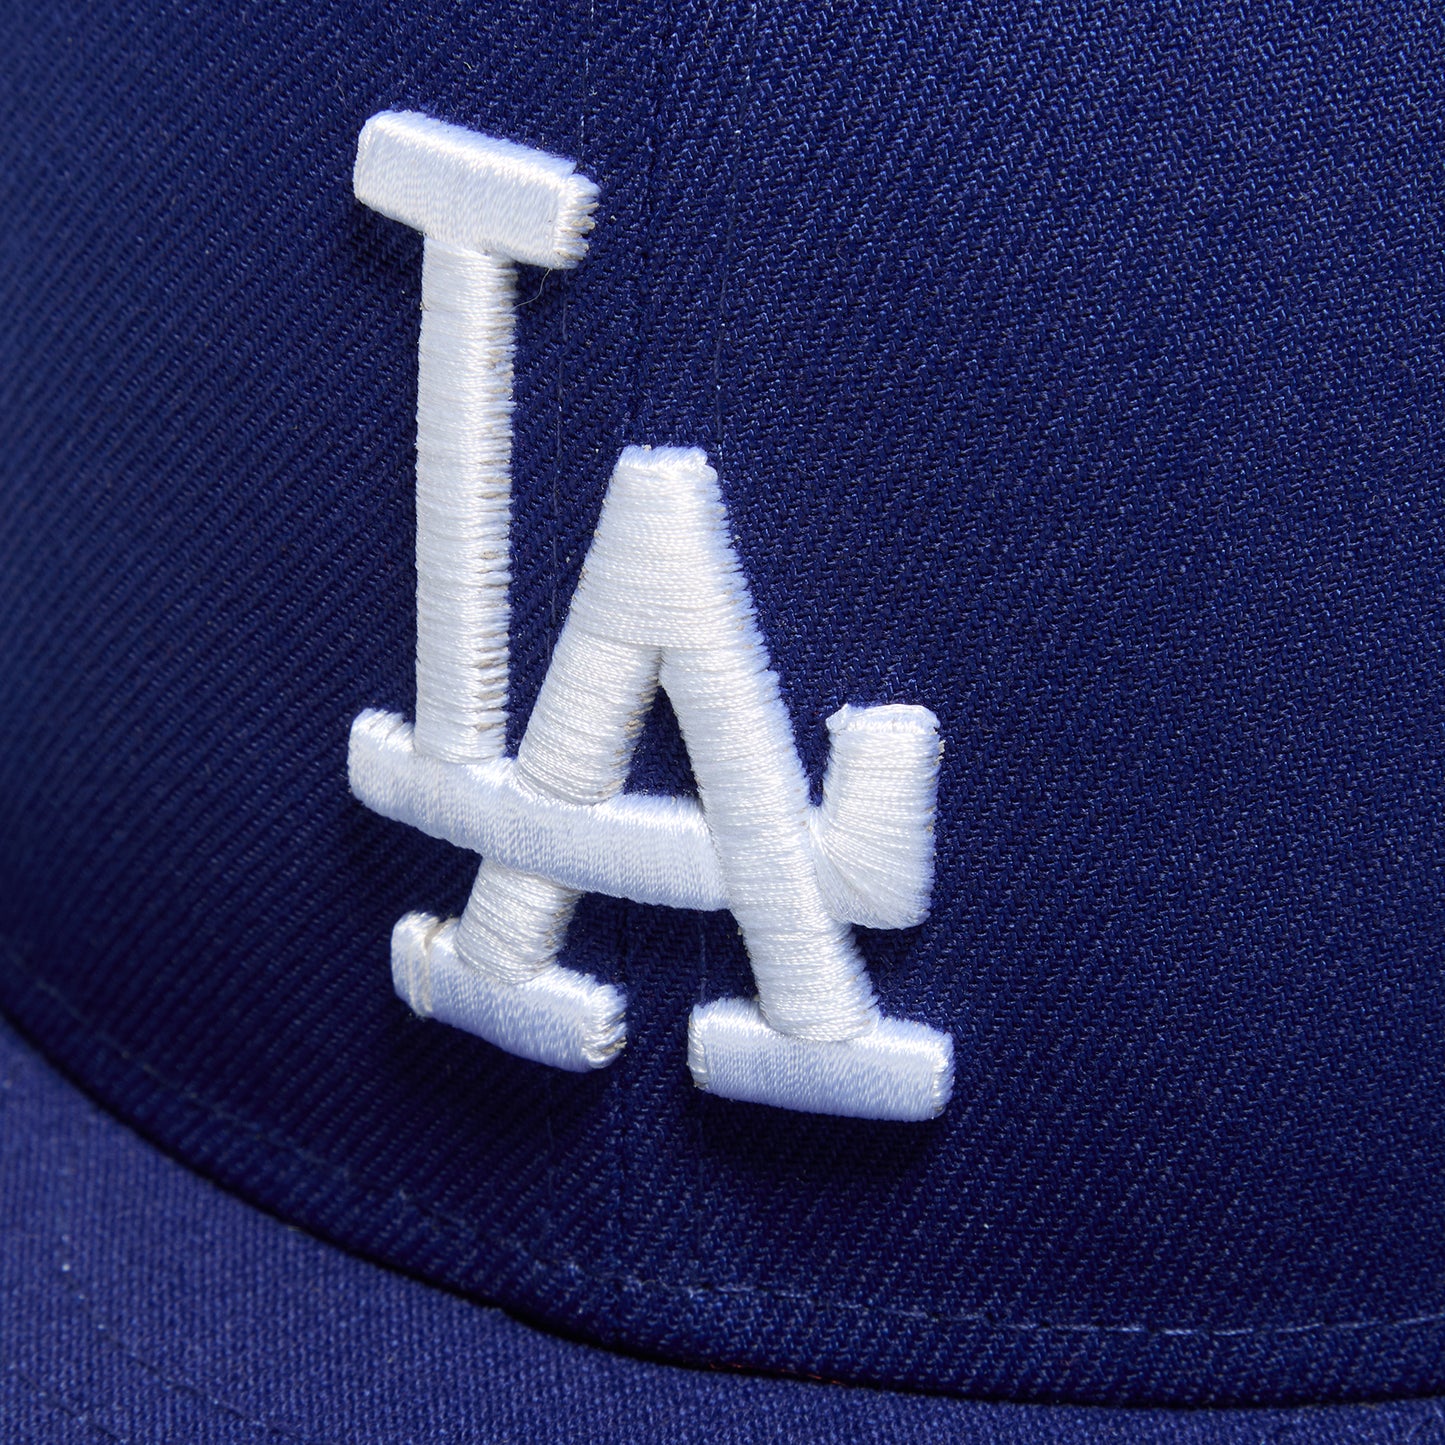 New Era Los Angeles Dodgers Fairway Camo 59Fifty Fitted Hat (Navy)